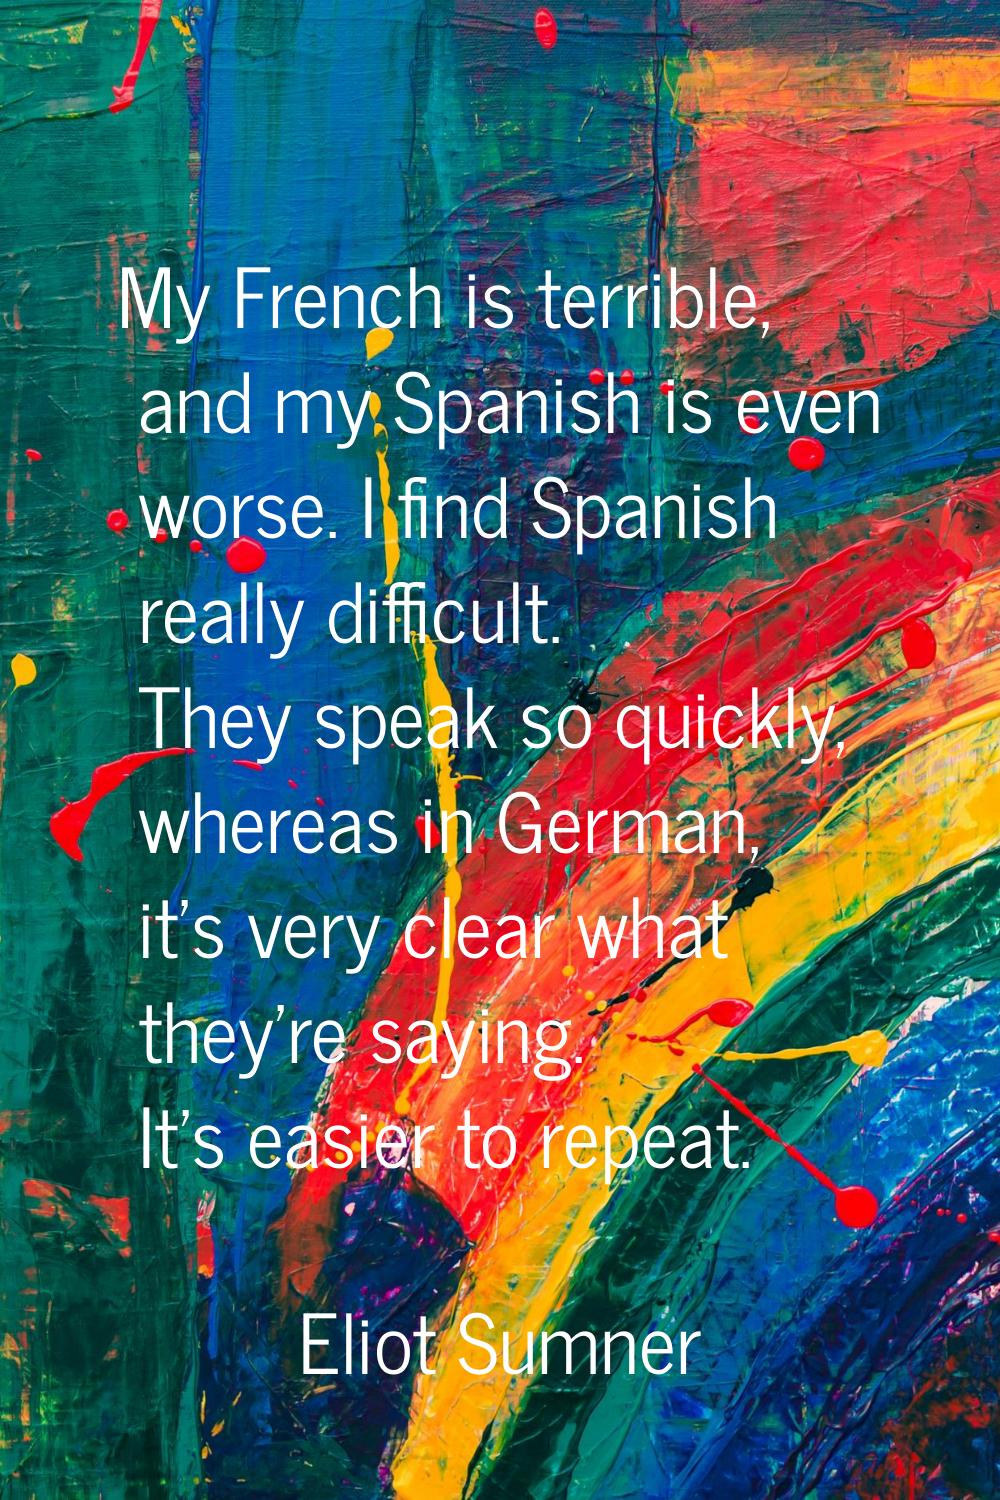 My French is terrible, and my Spanish is even worse. I find Spanish really difficult. They speak so